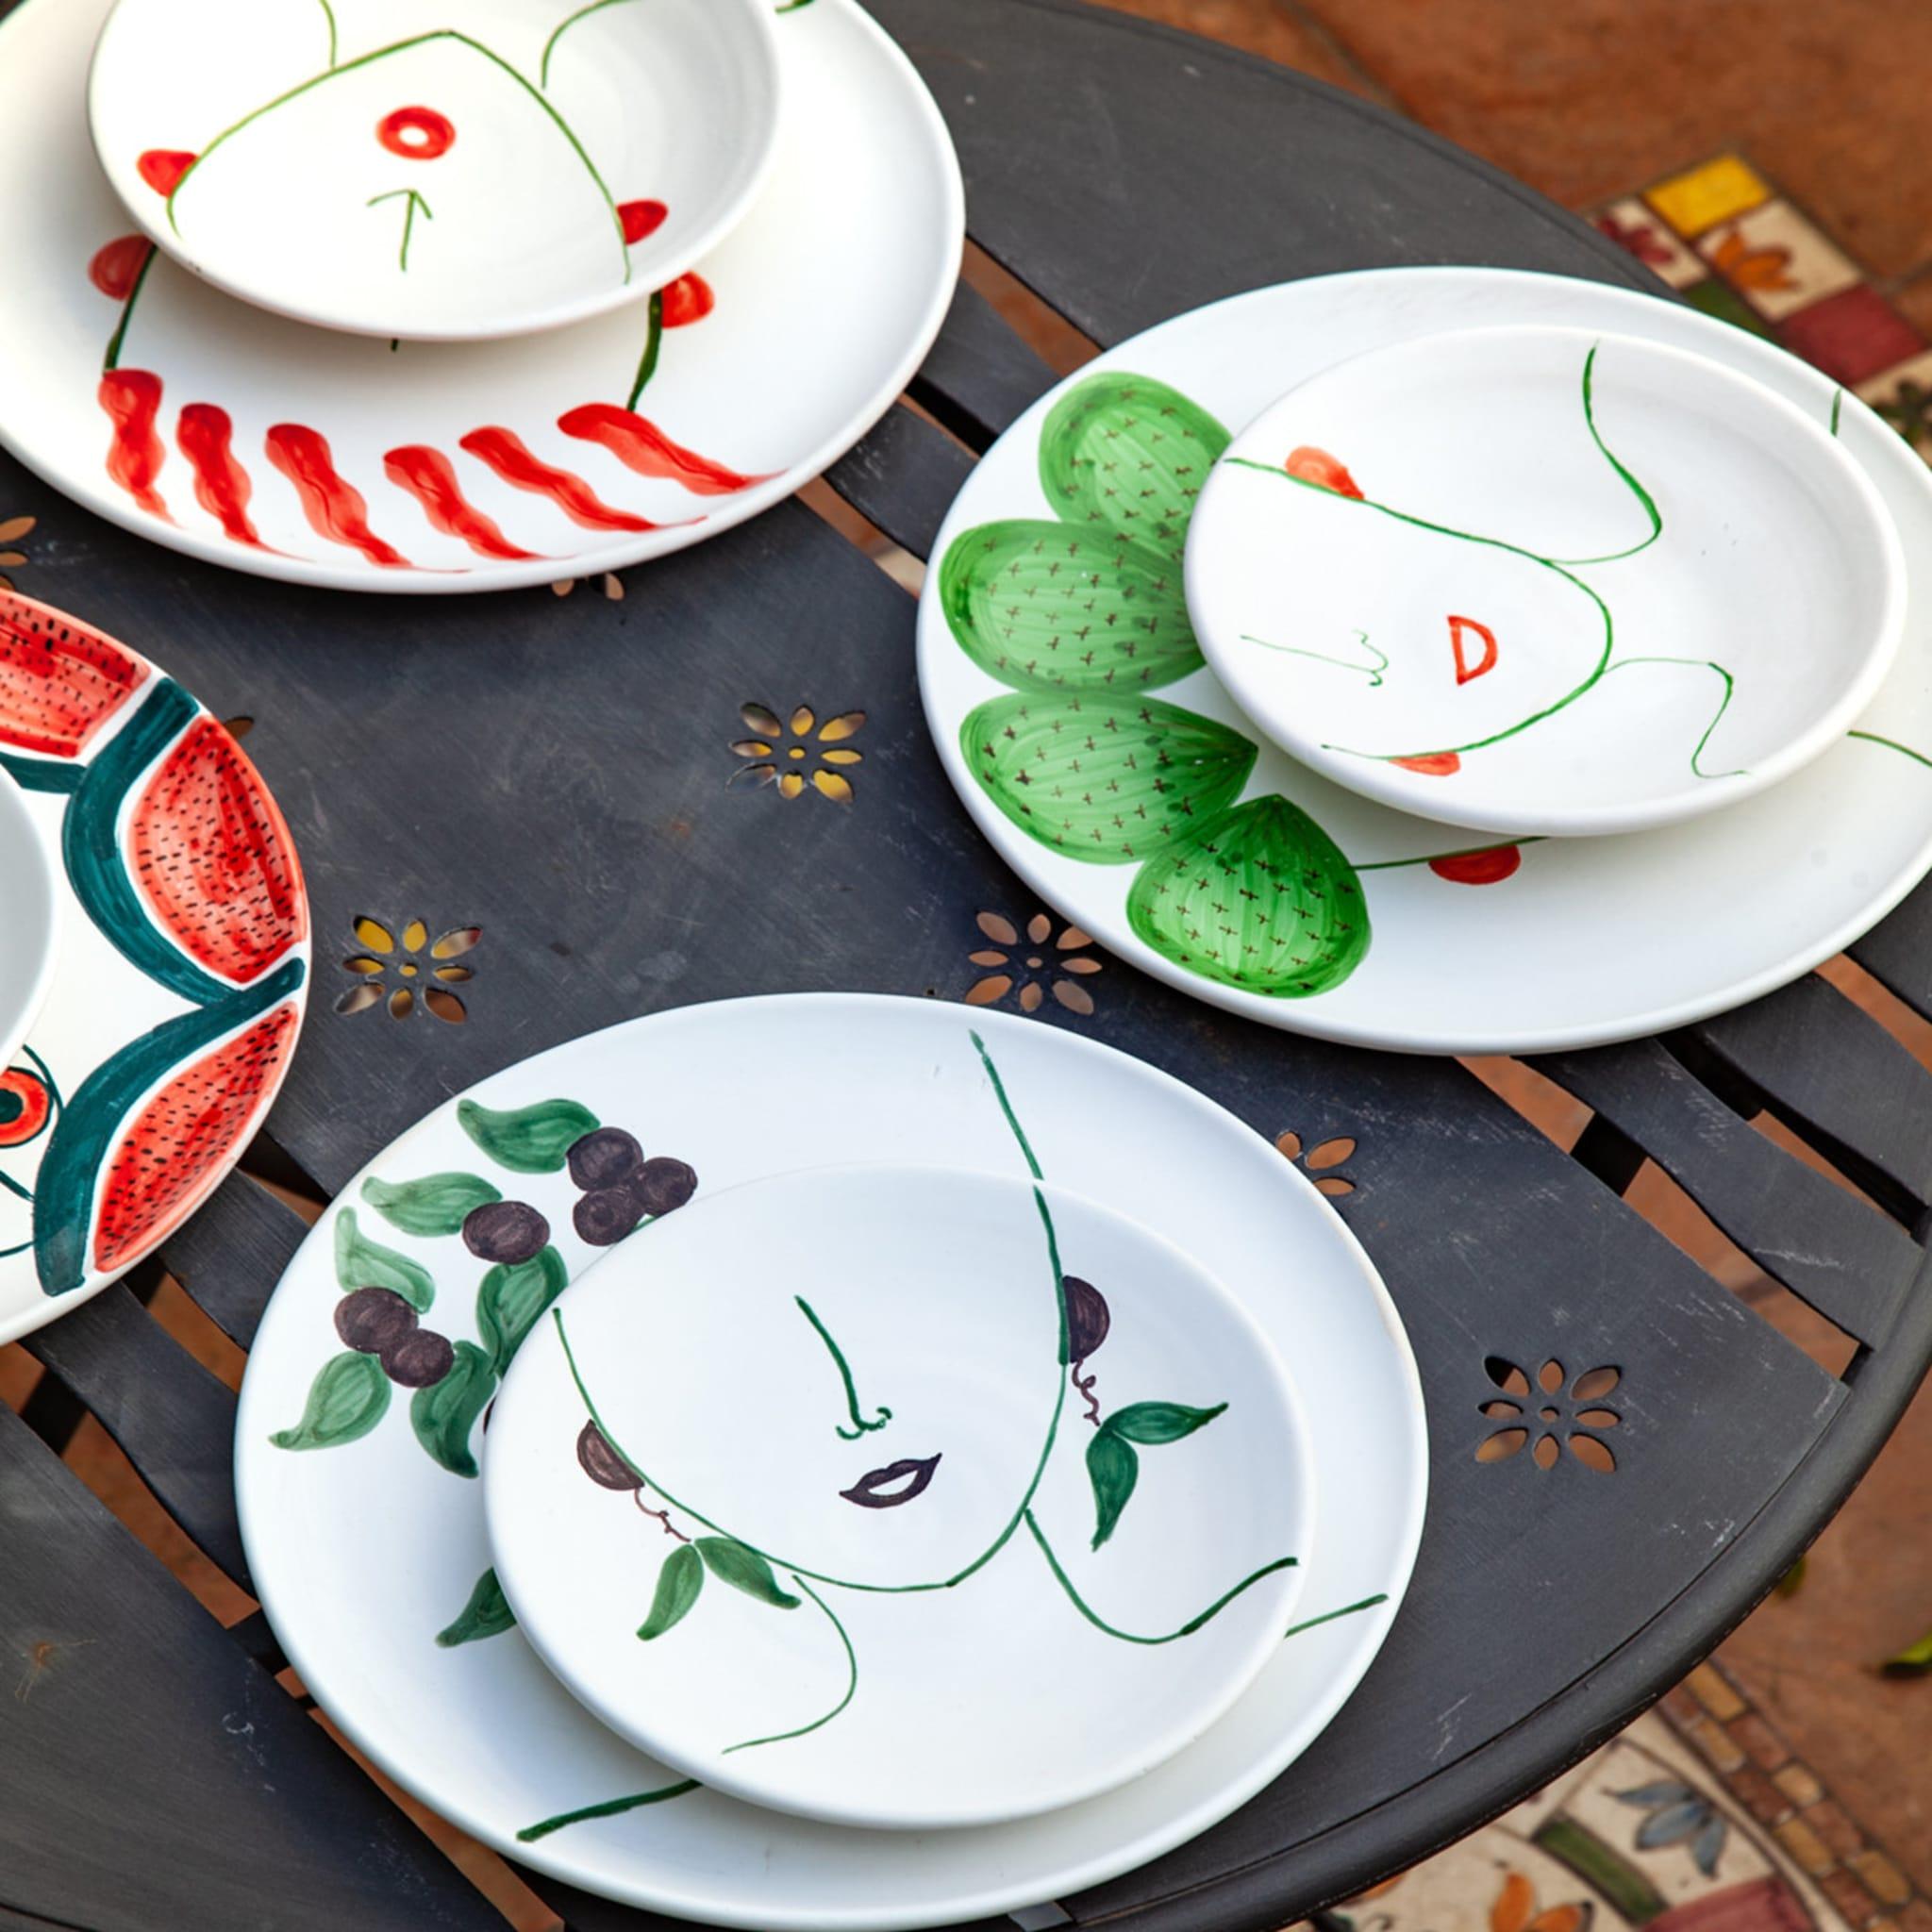 The bucolic flair imbuing this set in white-glazed ceramic is ennobled by the striking artistic sensibility of Patrizia Italiano, who deftly handcrafts and paints in green and black each of the three plates composing the set. A feminine stylized